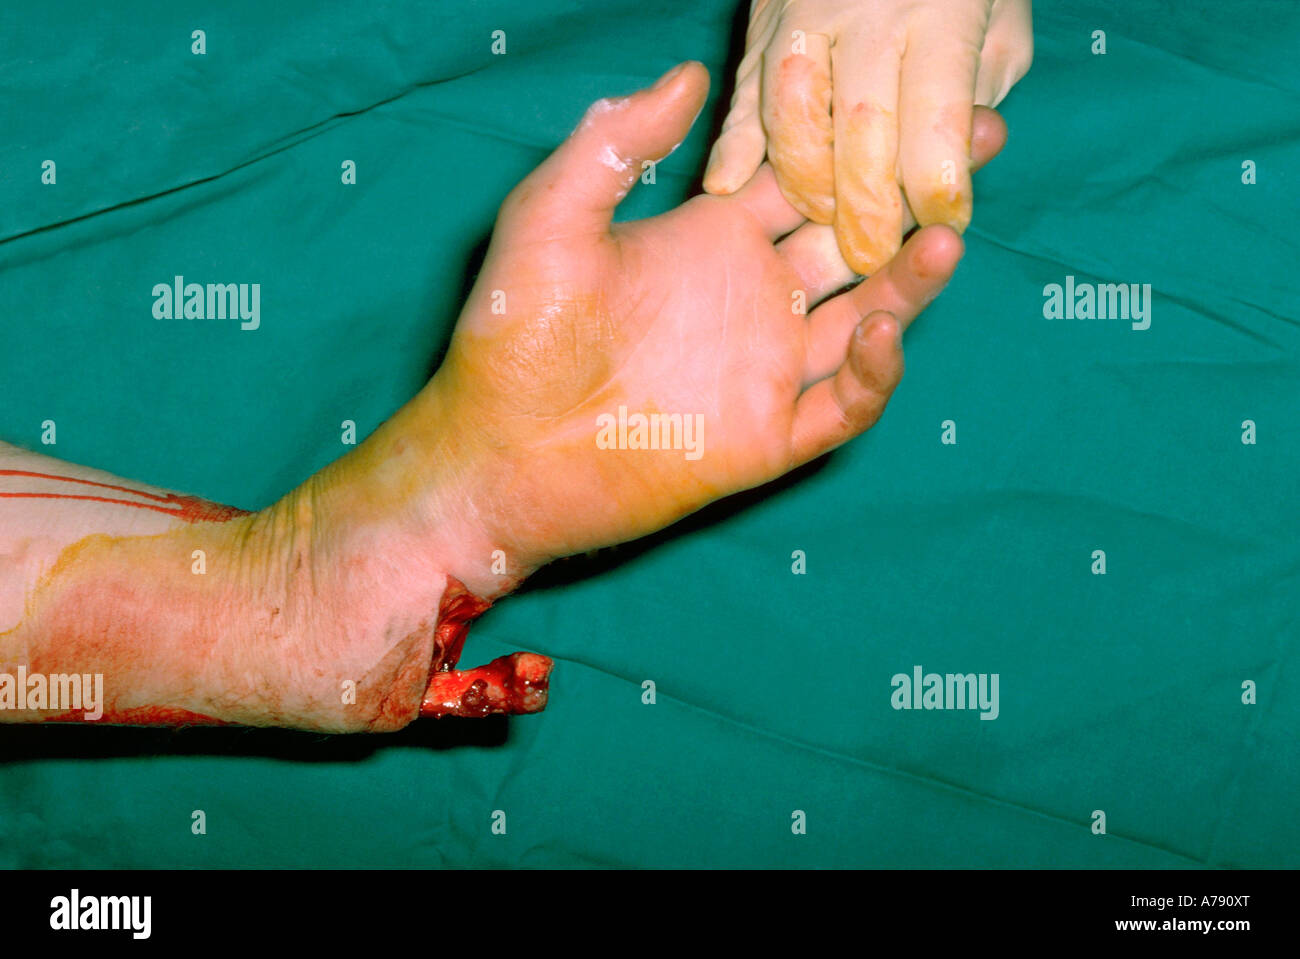 Compound Fracture High Resolution Stock Photography and Images - Alamy